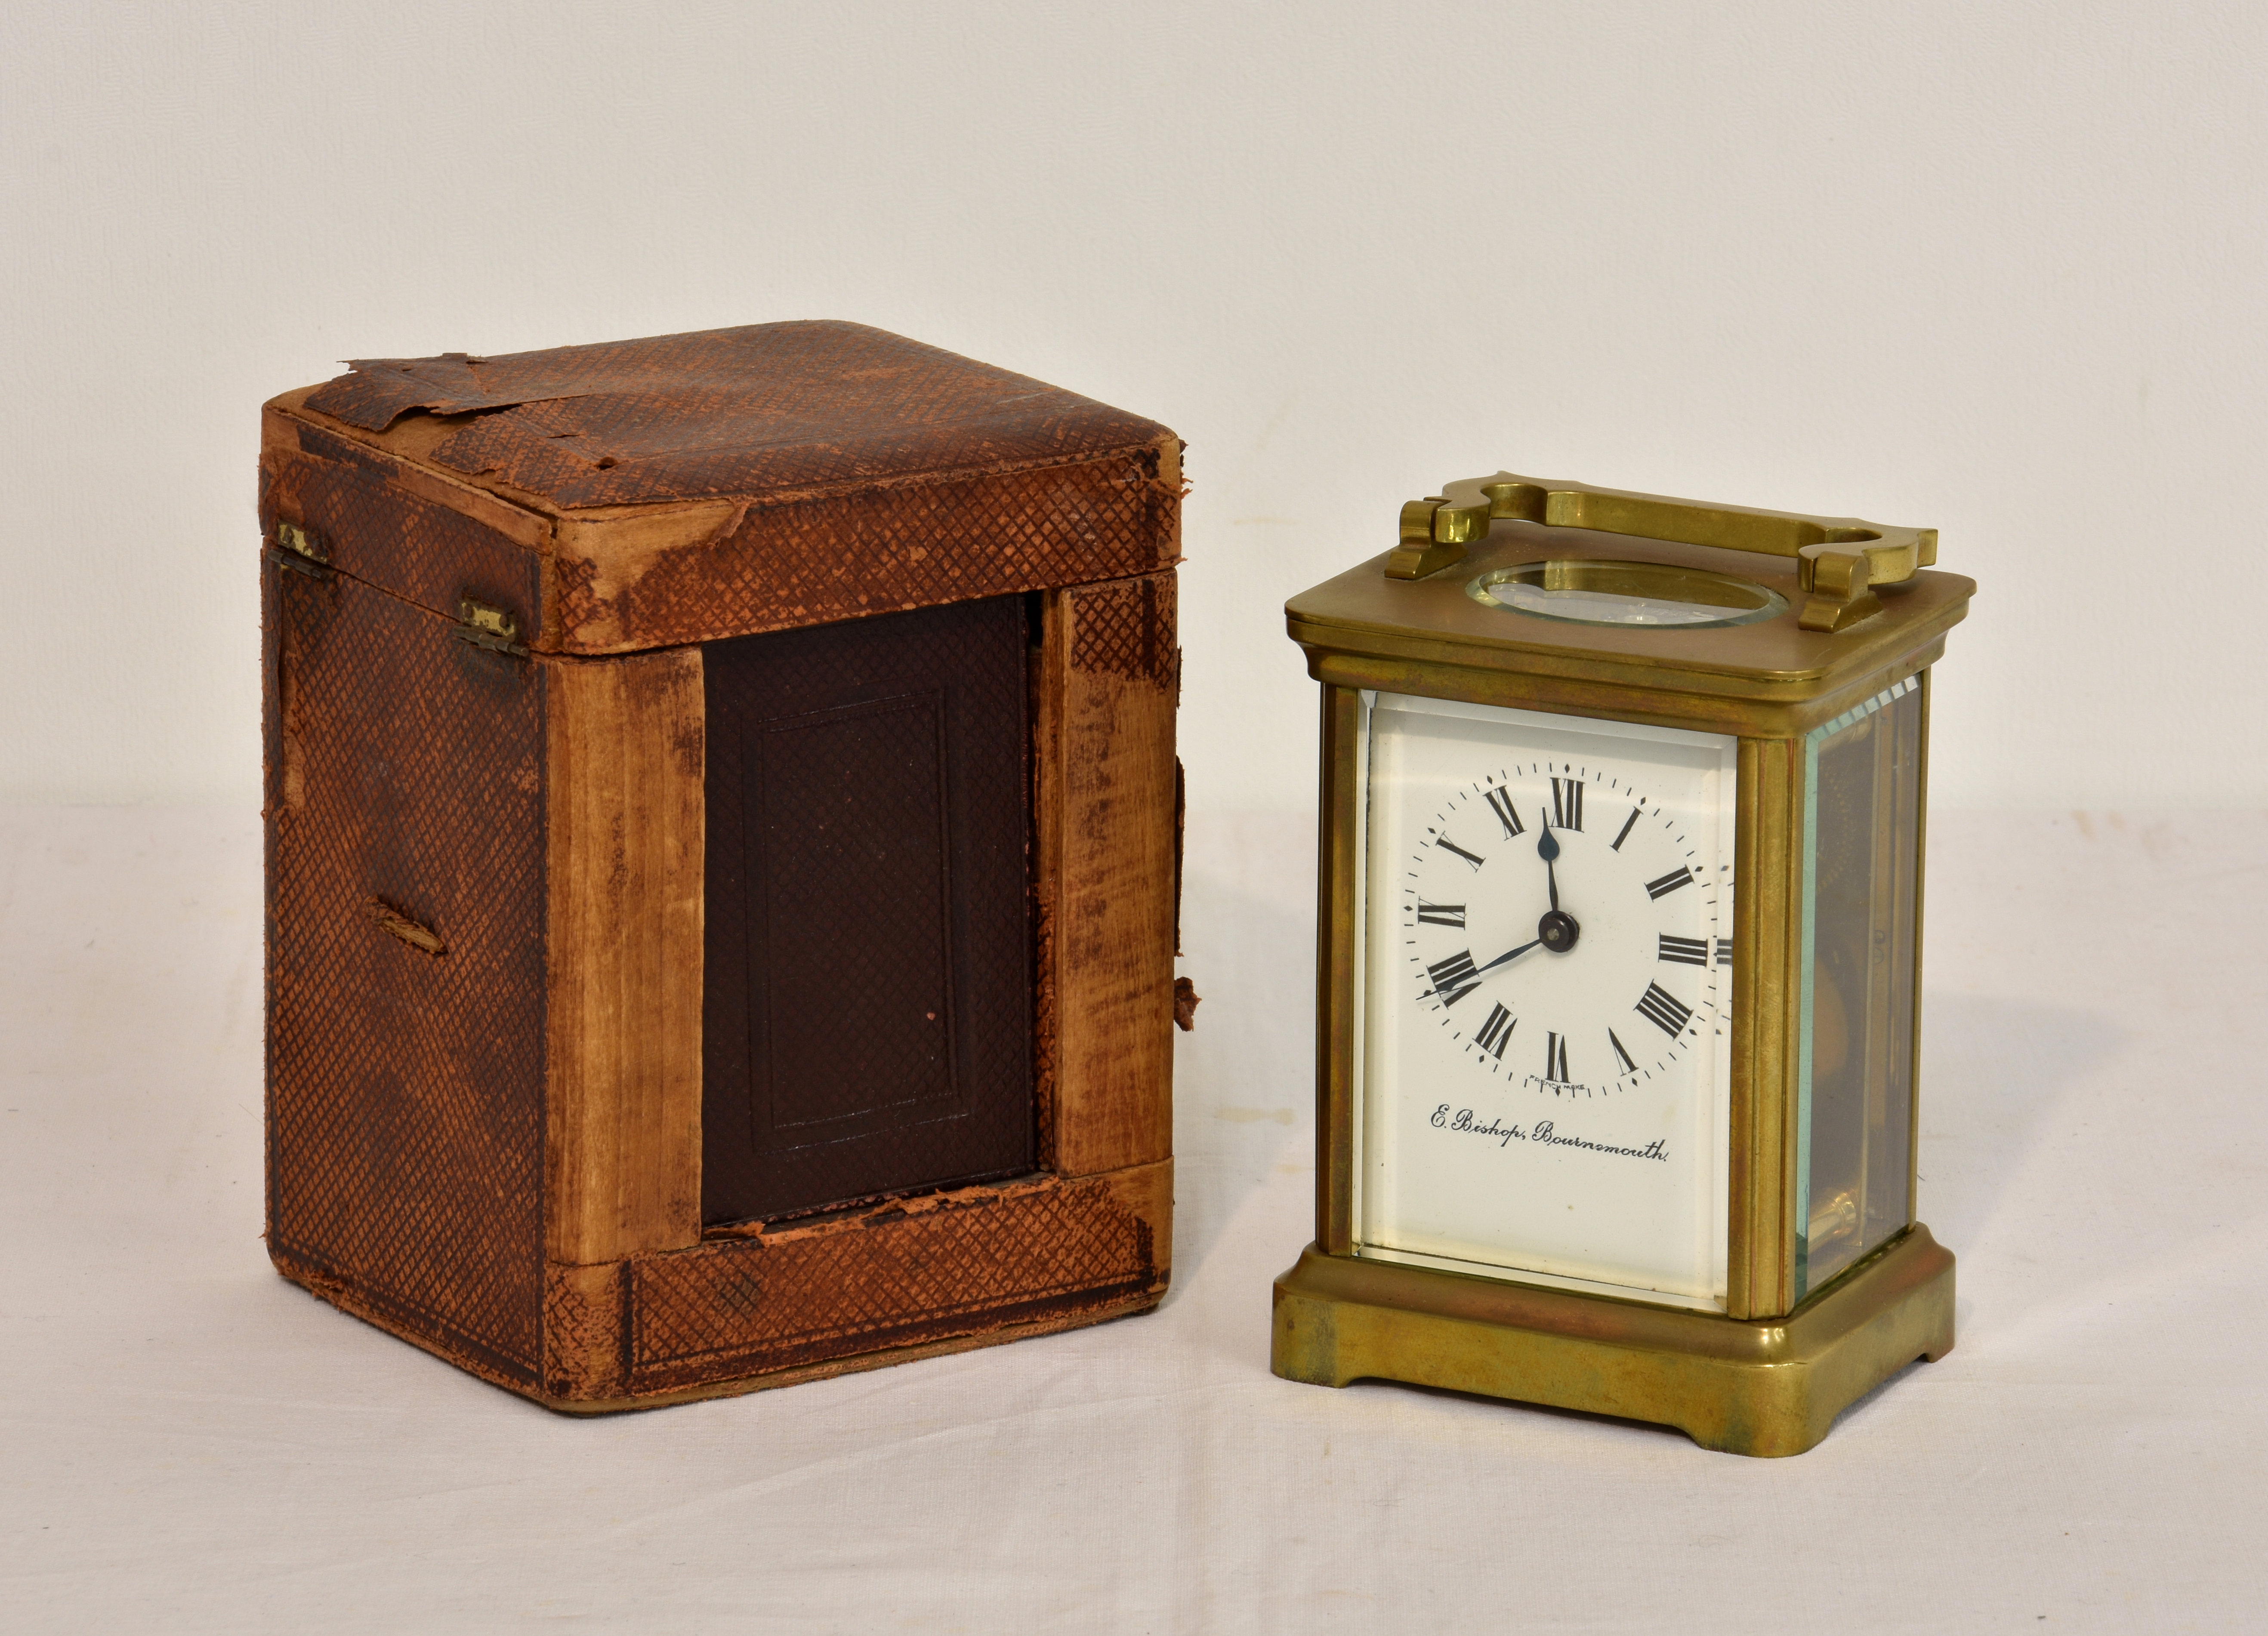 An early 20th century French brass carriage clock, by Duverdry & Bloquel, single train movement with